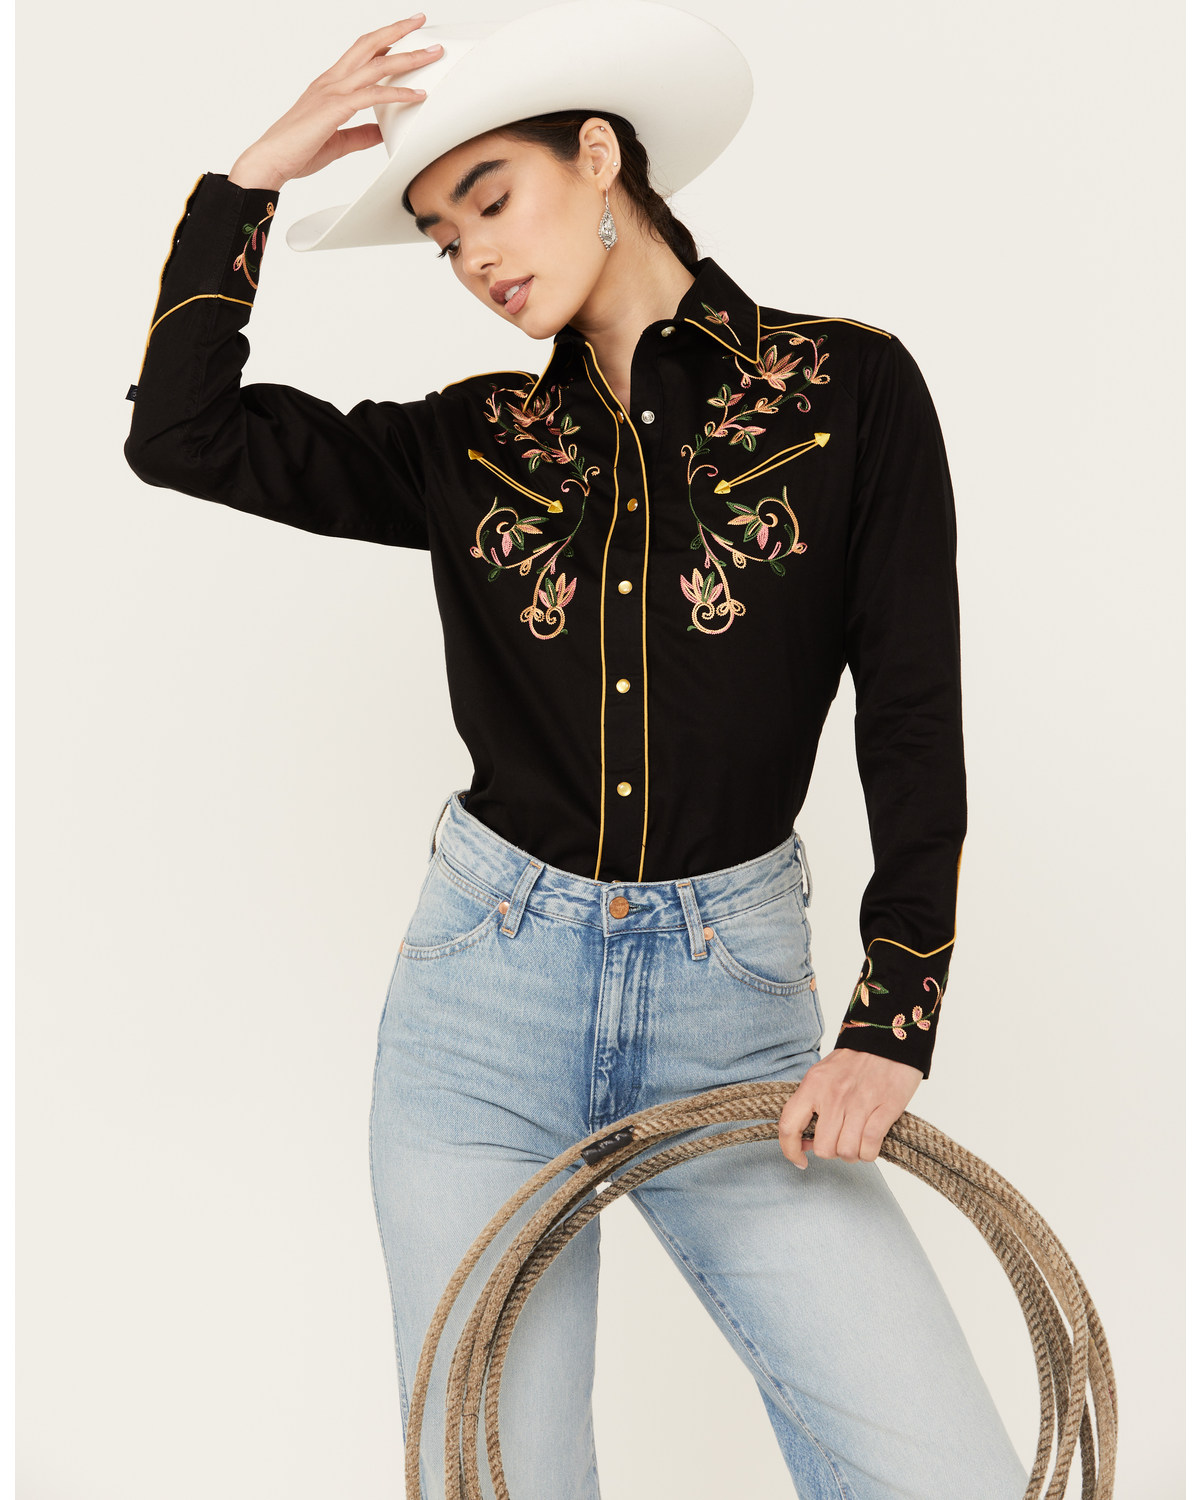 Rockmount Ranchwear Women's Floral Embroidered Long Sleeve Pearl Snap Western Shirt